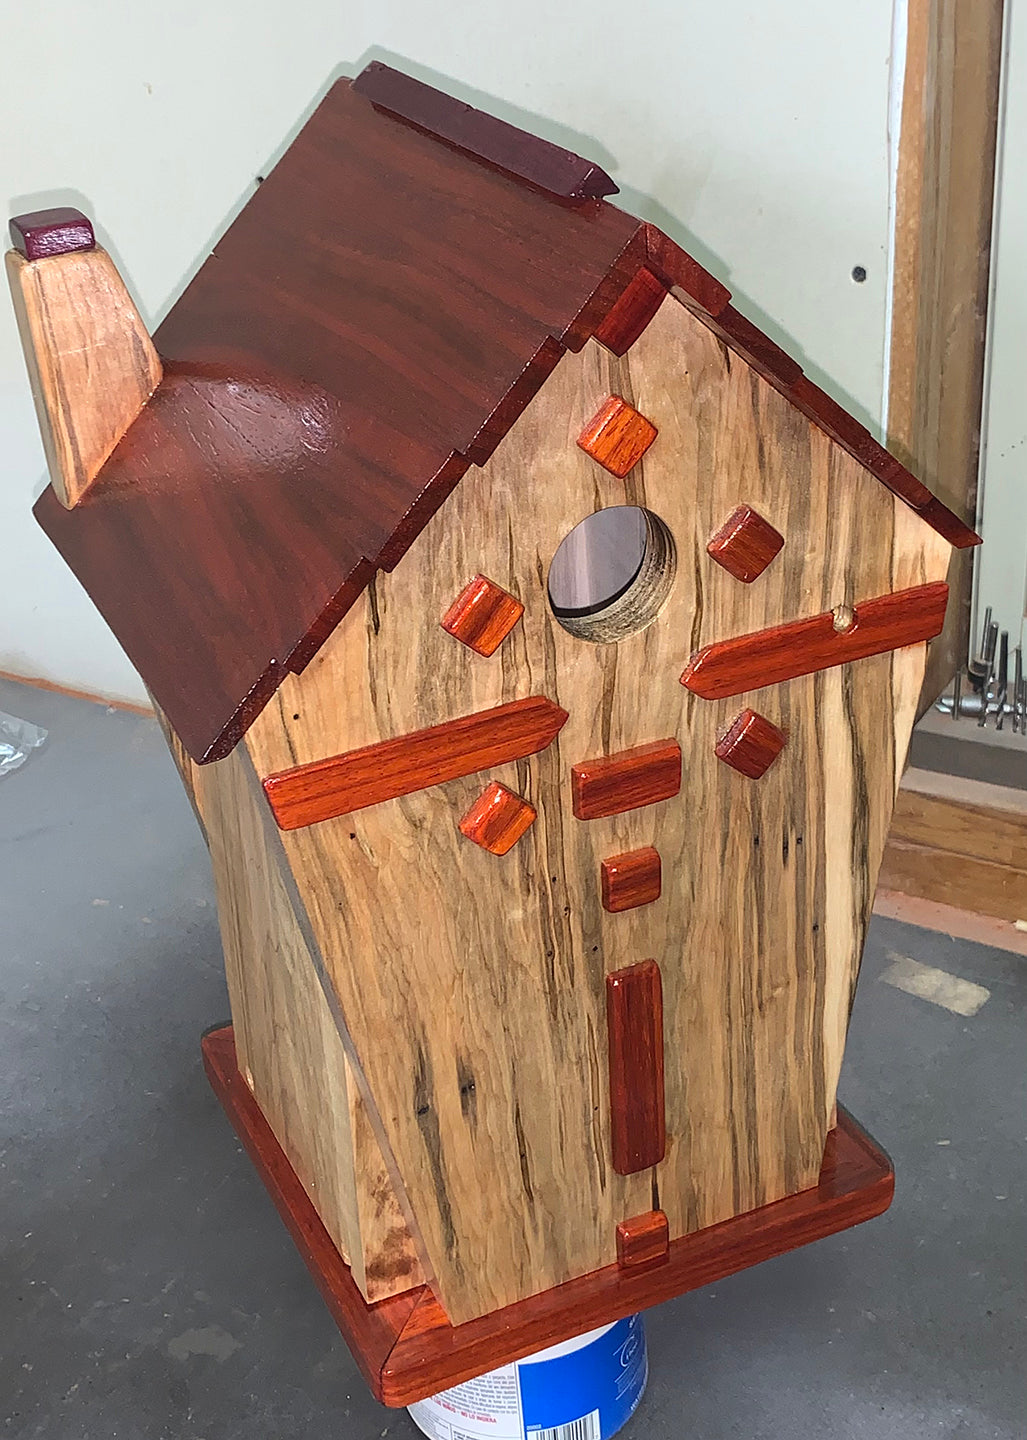 Woodpecker House in Figured Ambrosia Maple and African Padauk with a hint of Purpleheart